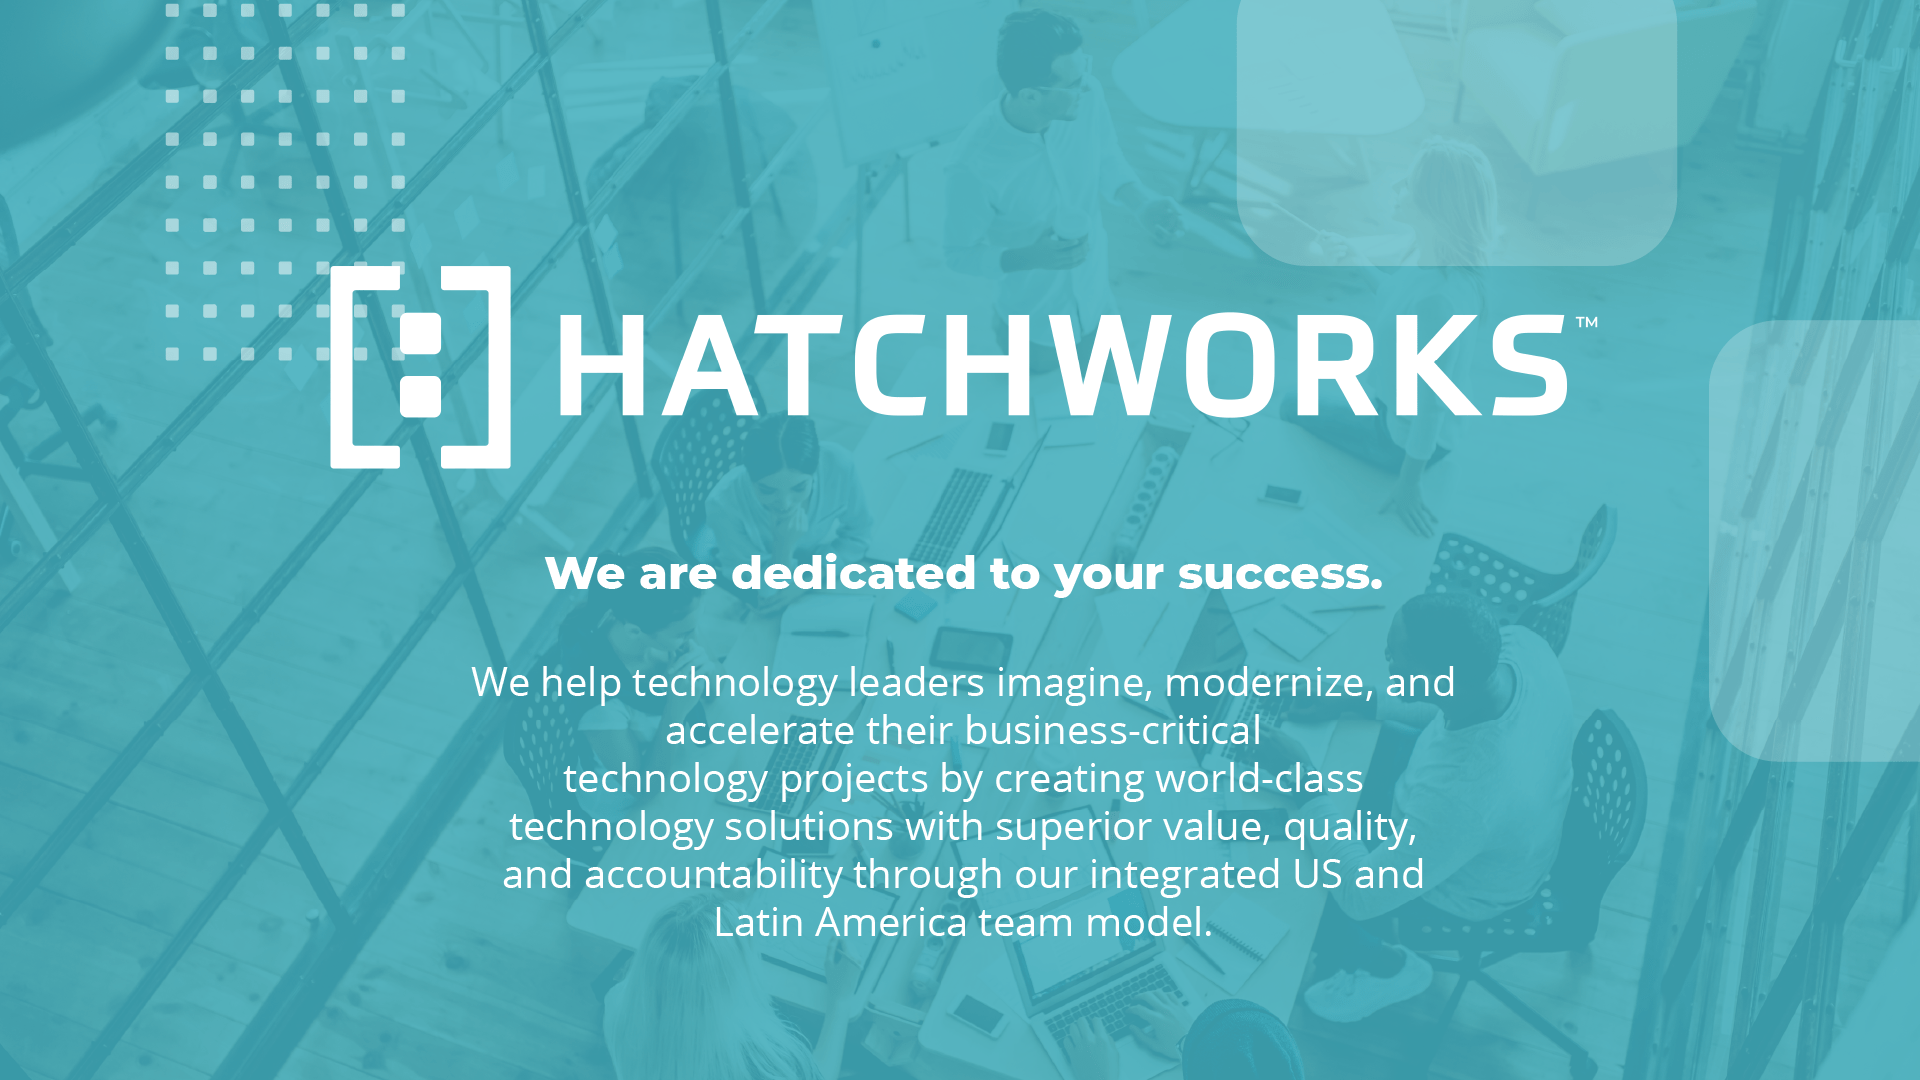 HatchWorks | Full lifecycle software design and development services